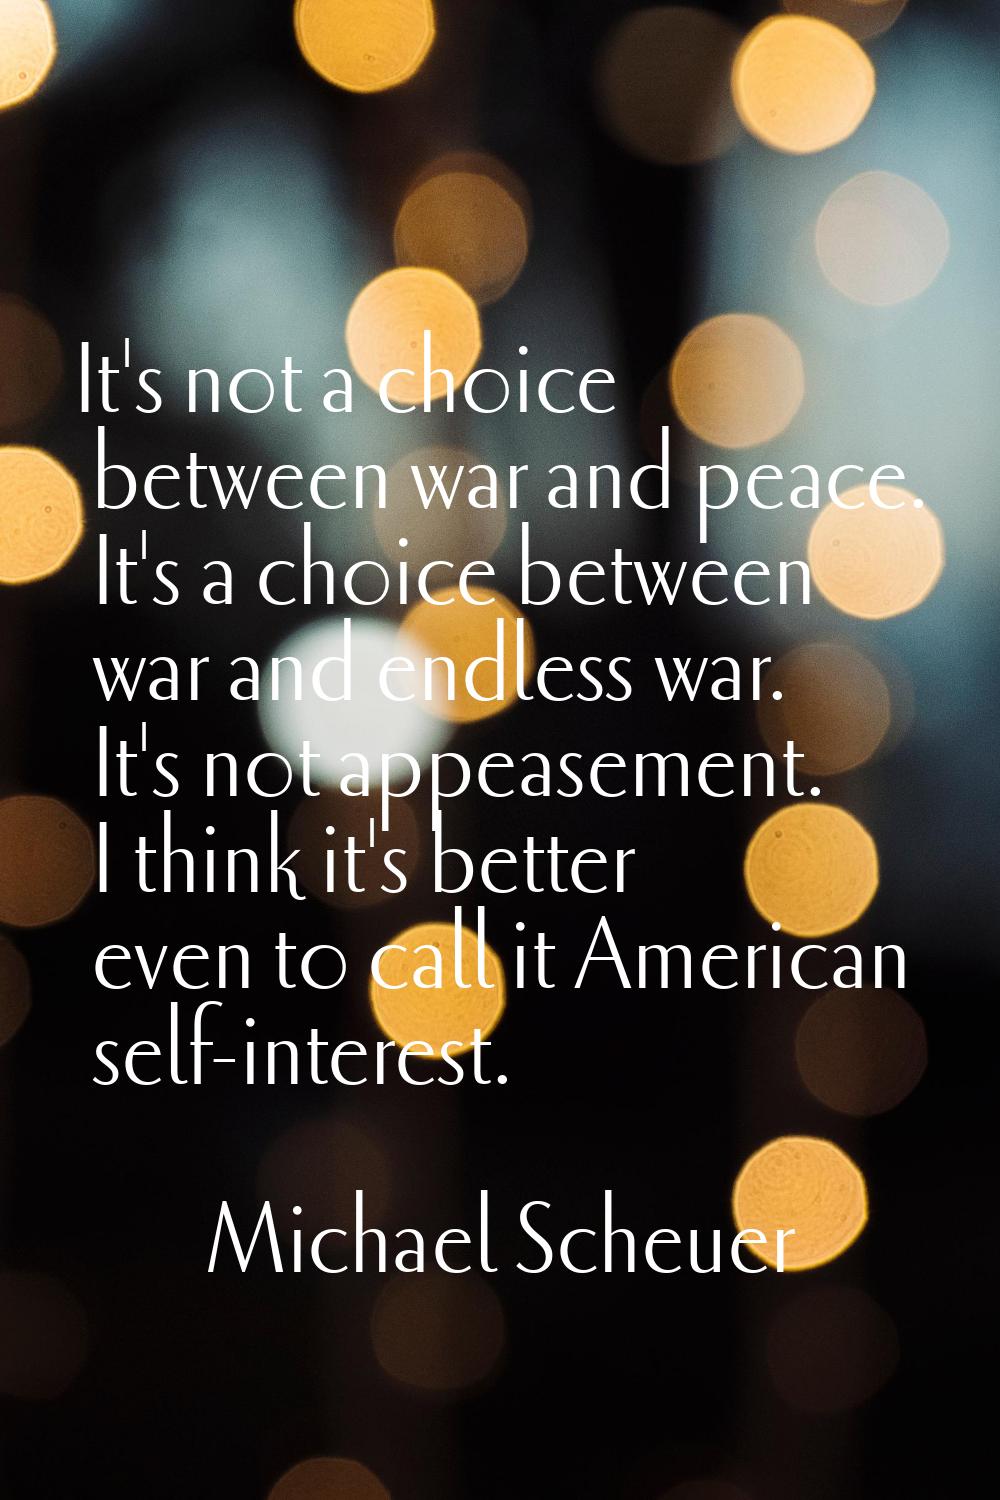 It's not a choice between war and peace. It's a choice between war and endless war. It's not appeas